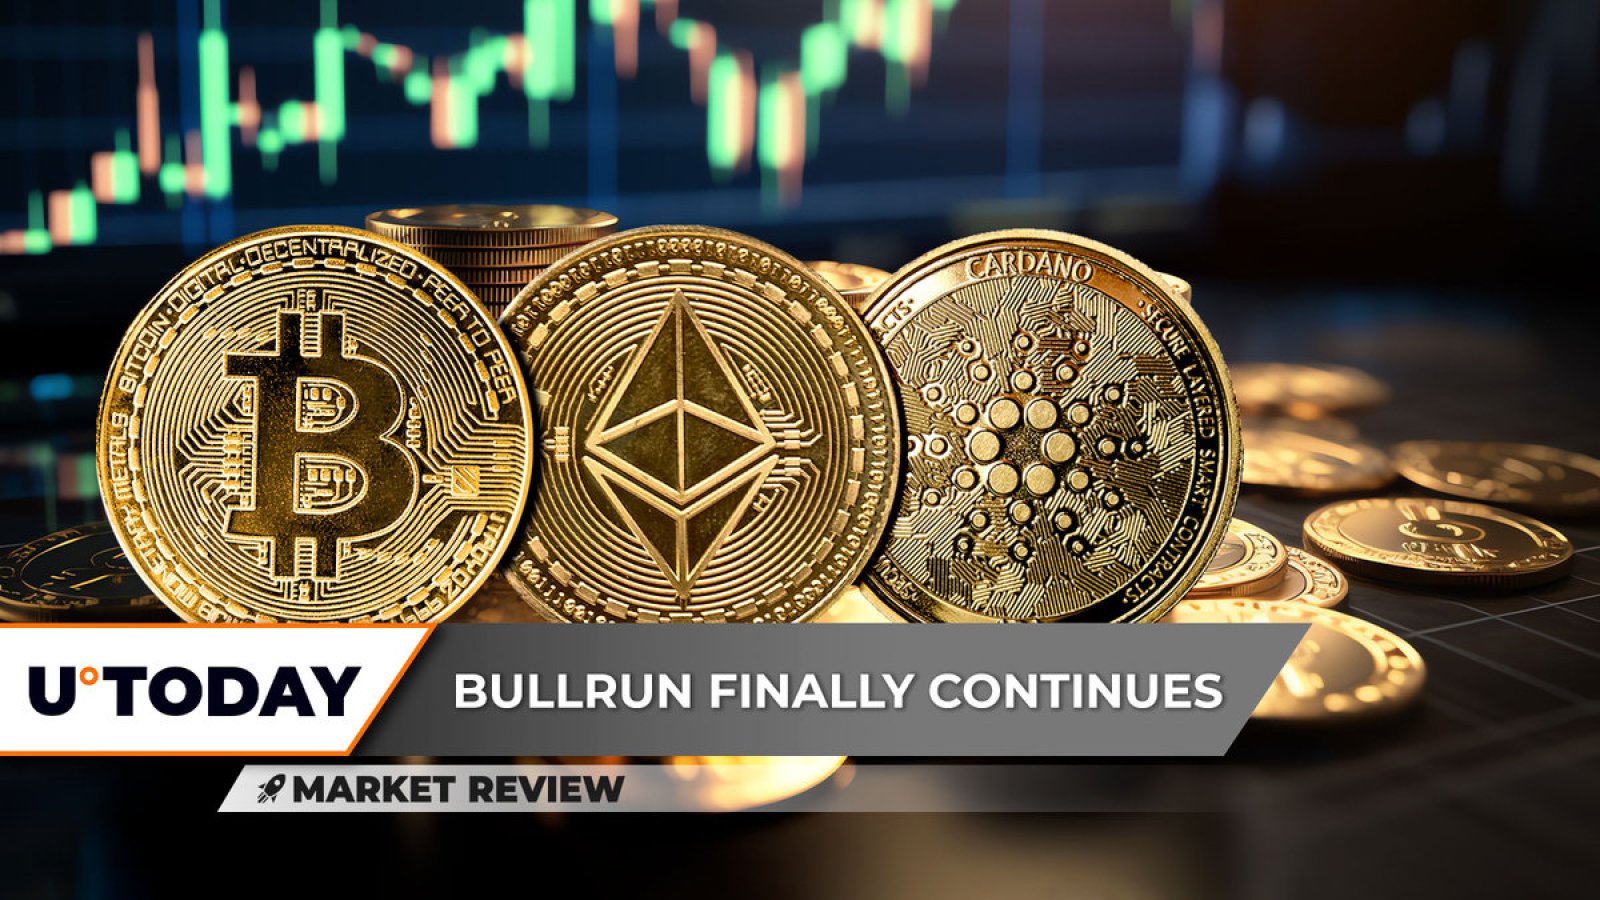 Ethereum (ETH) Climbs Back Above $3,000, Massive $70,000 Bitcoin (BTC) Battle Ahead, Cardano (ADA) About to Face Its Biggest Test